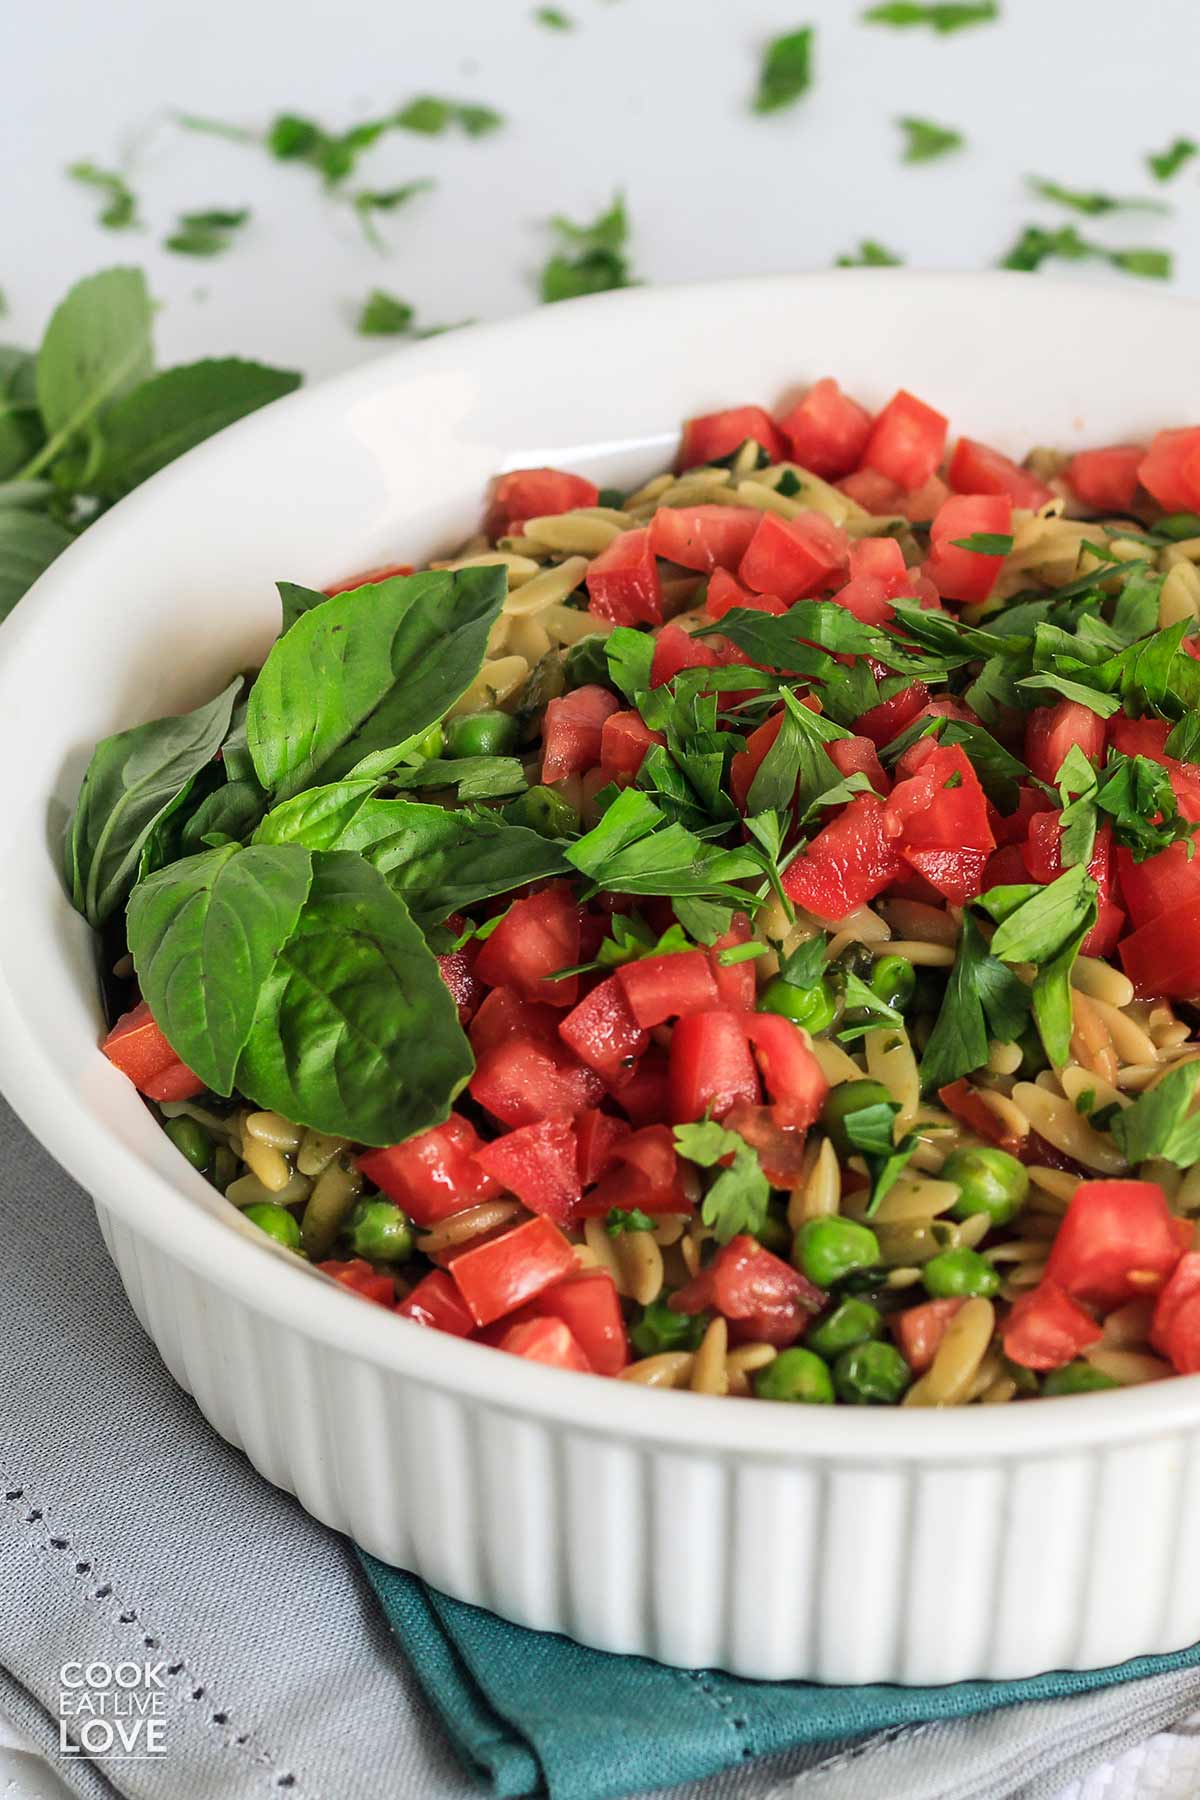 Pesto orzo in a serving bowl garnished with diced tomatoes.